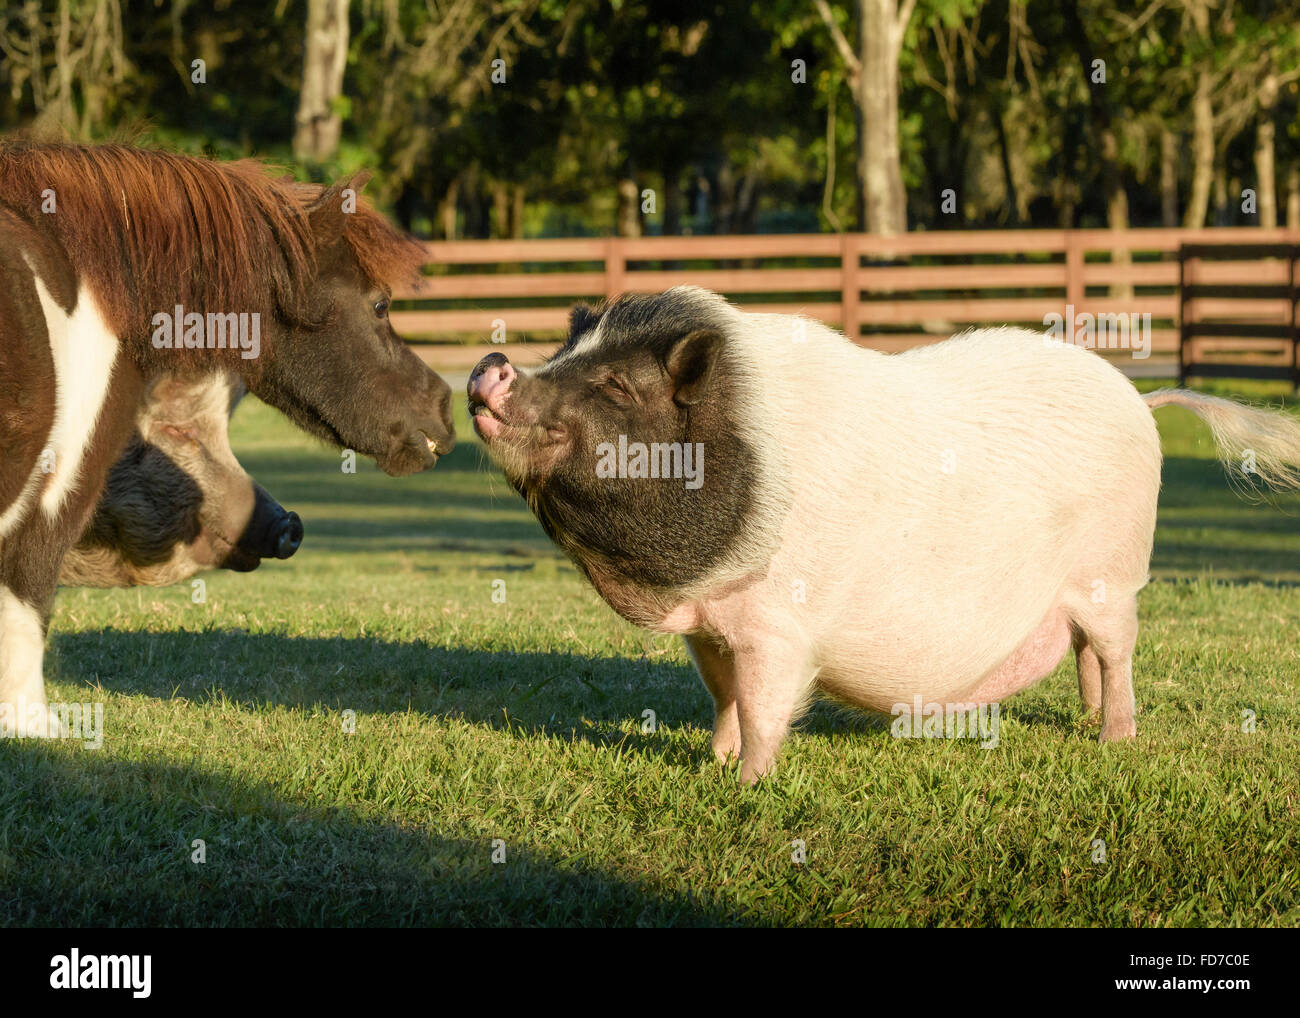 Pot Bellied Pig and Miniature Horse Stock Photo